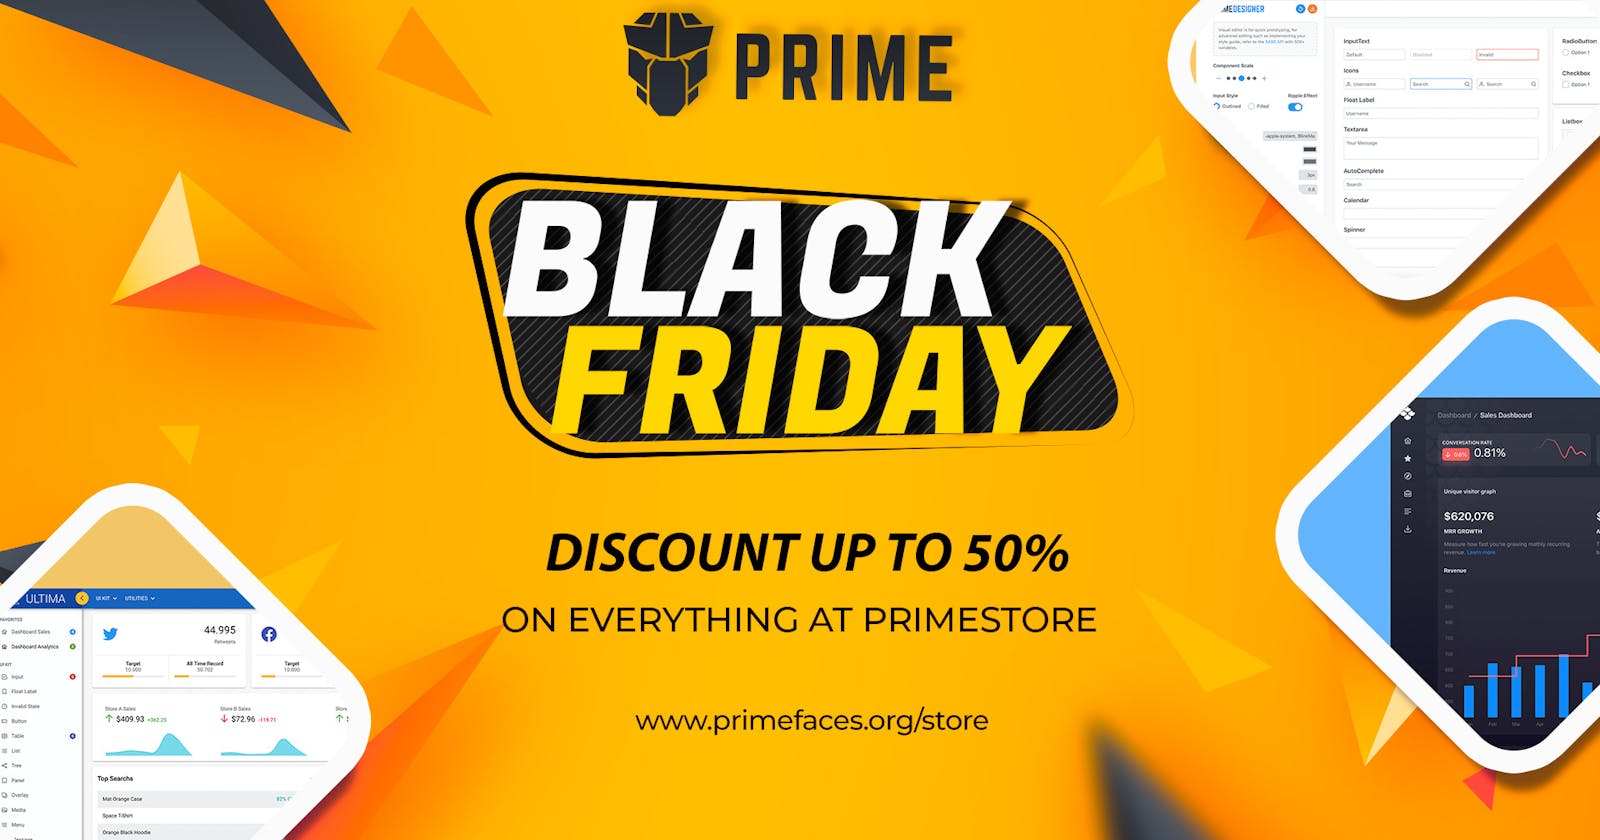 Black Friday is at PrimeStore to bring up to 50% discounts on everything!